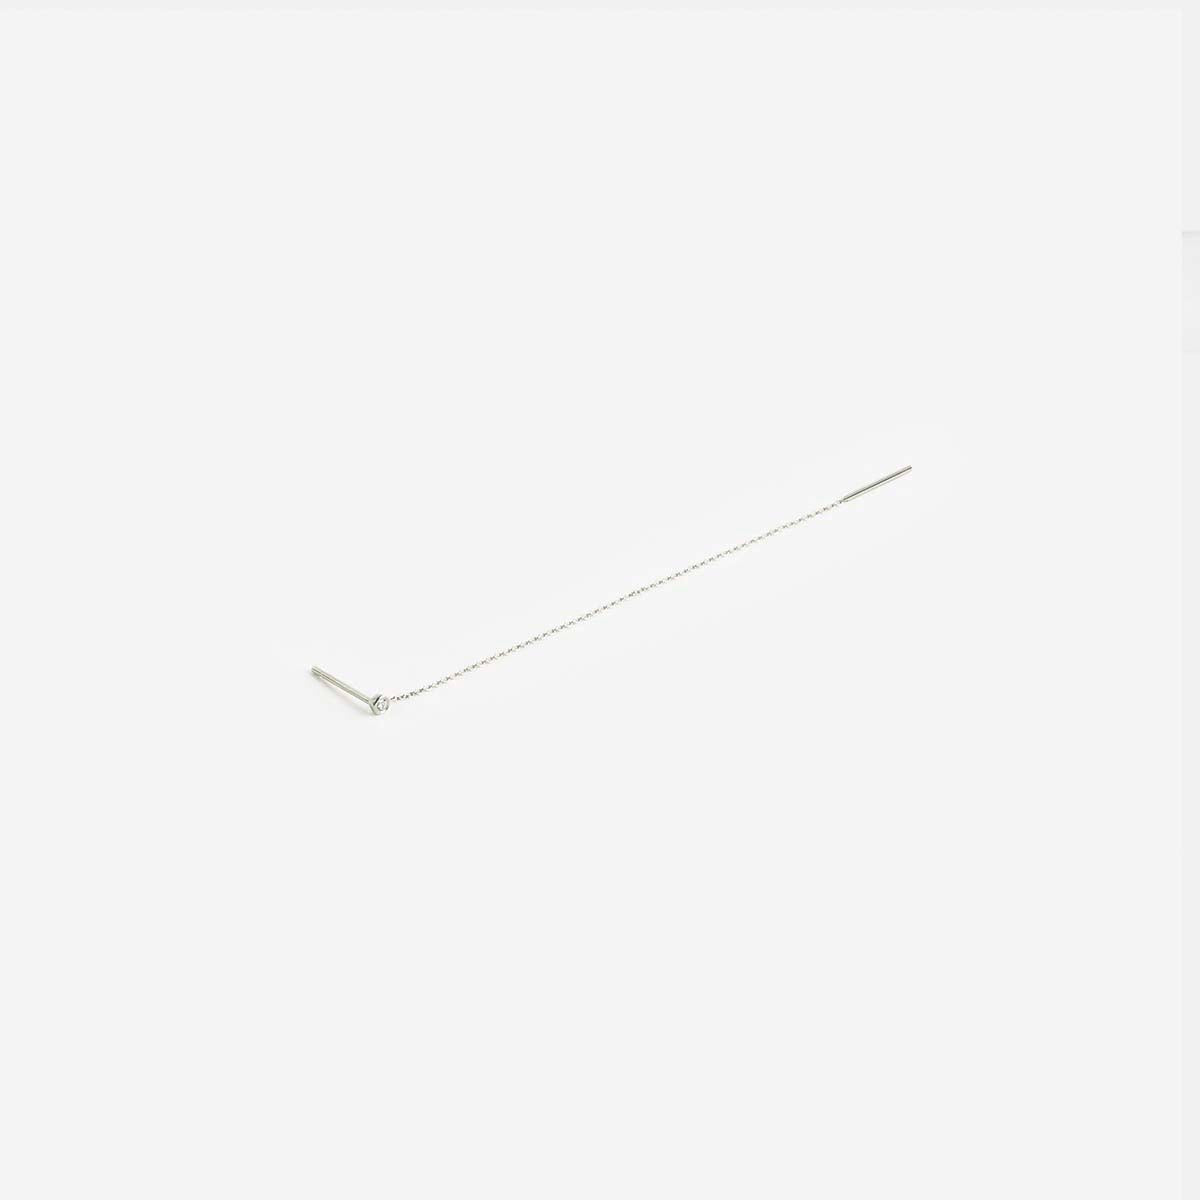 Vesa Alternative Threader Earring in 14k White Gold set with White Diamond By SHW Fine Jewelry NYC